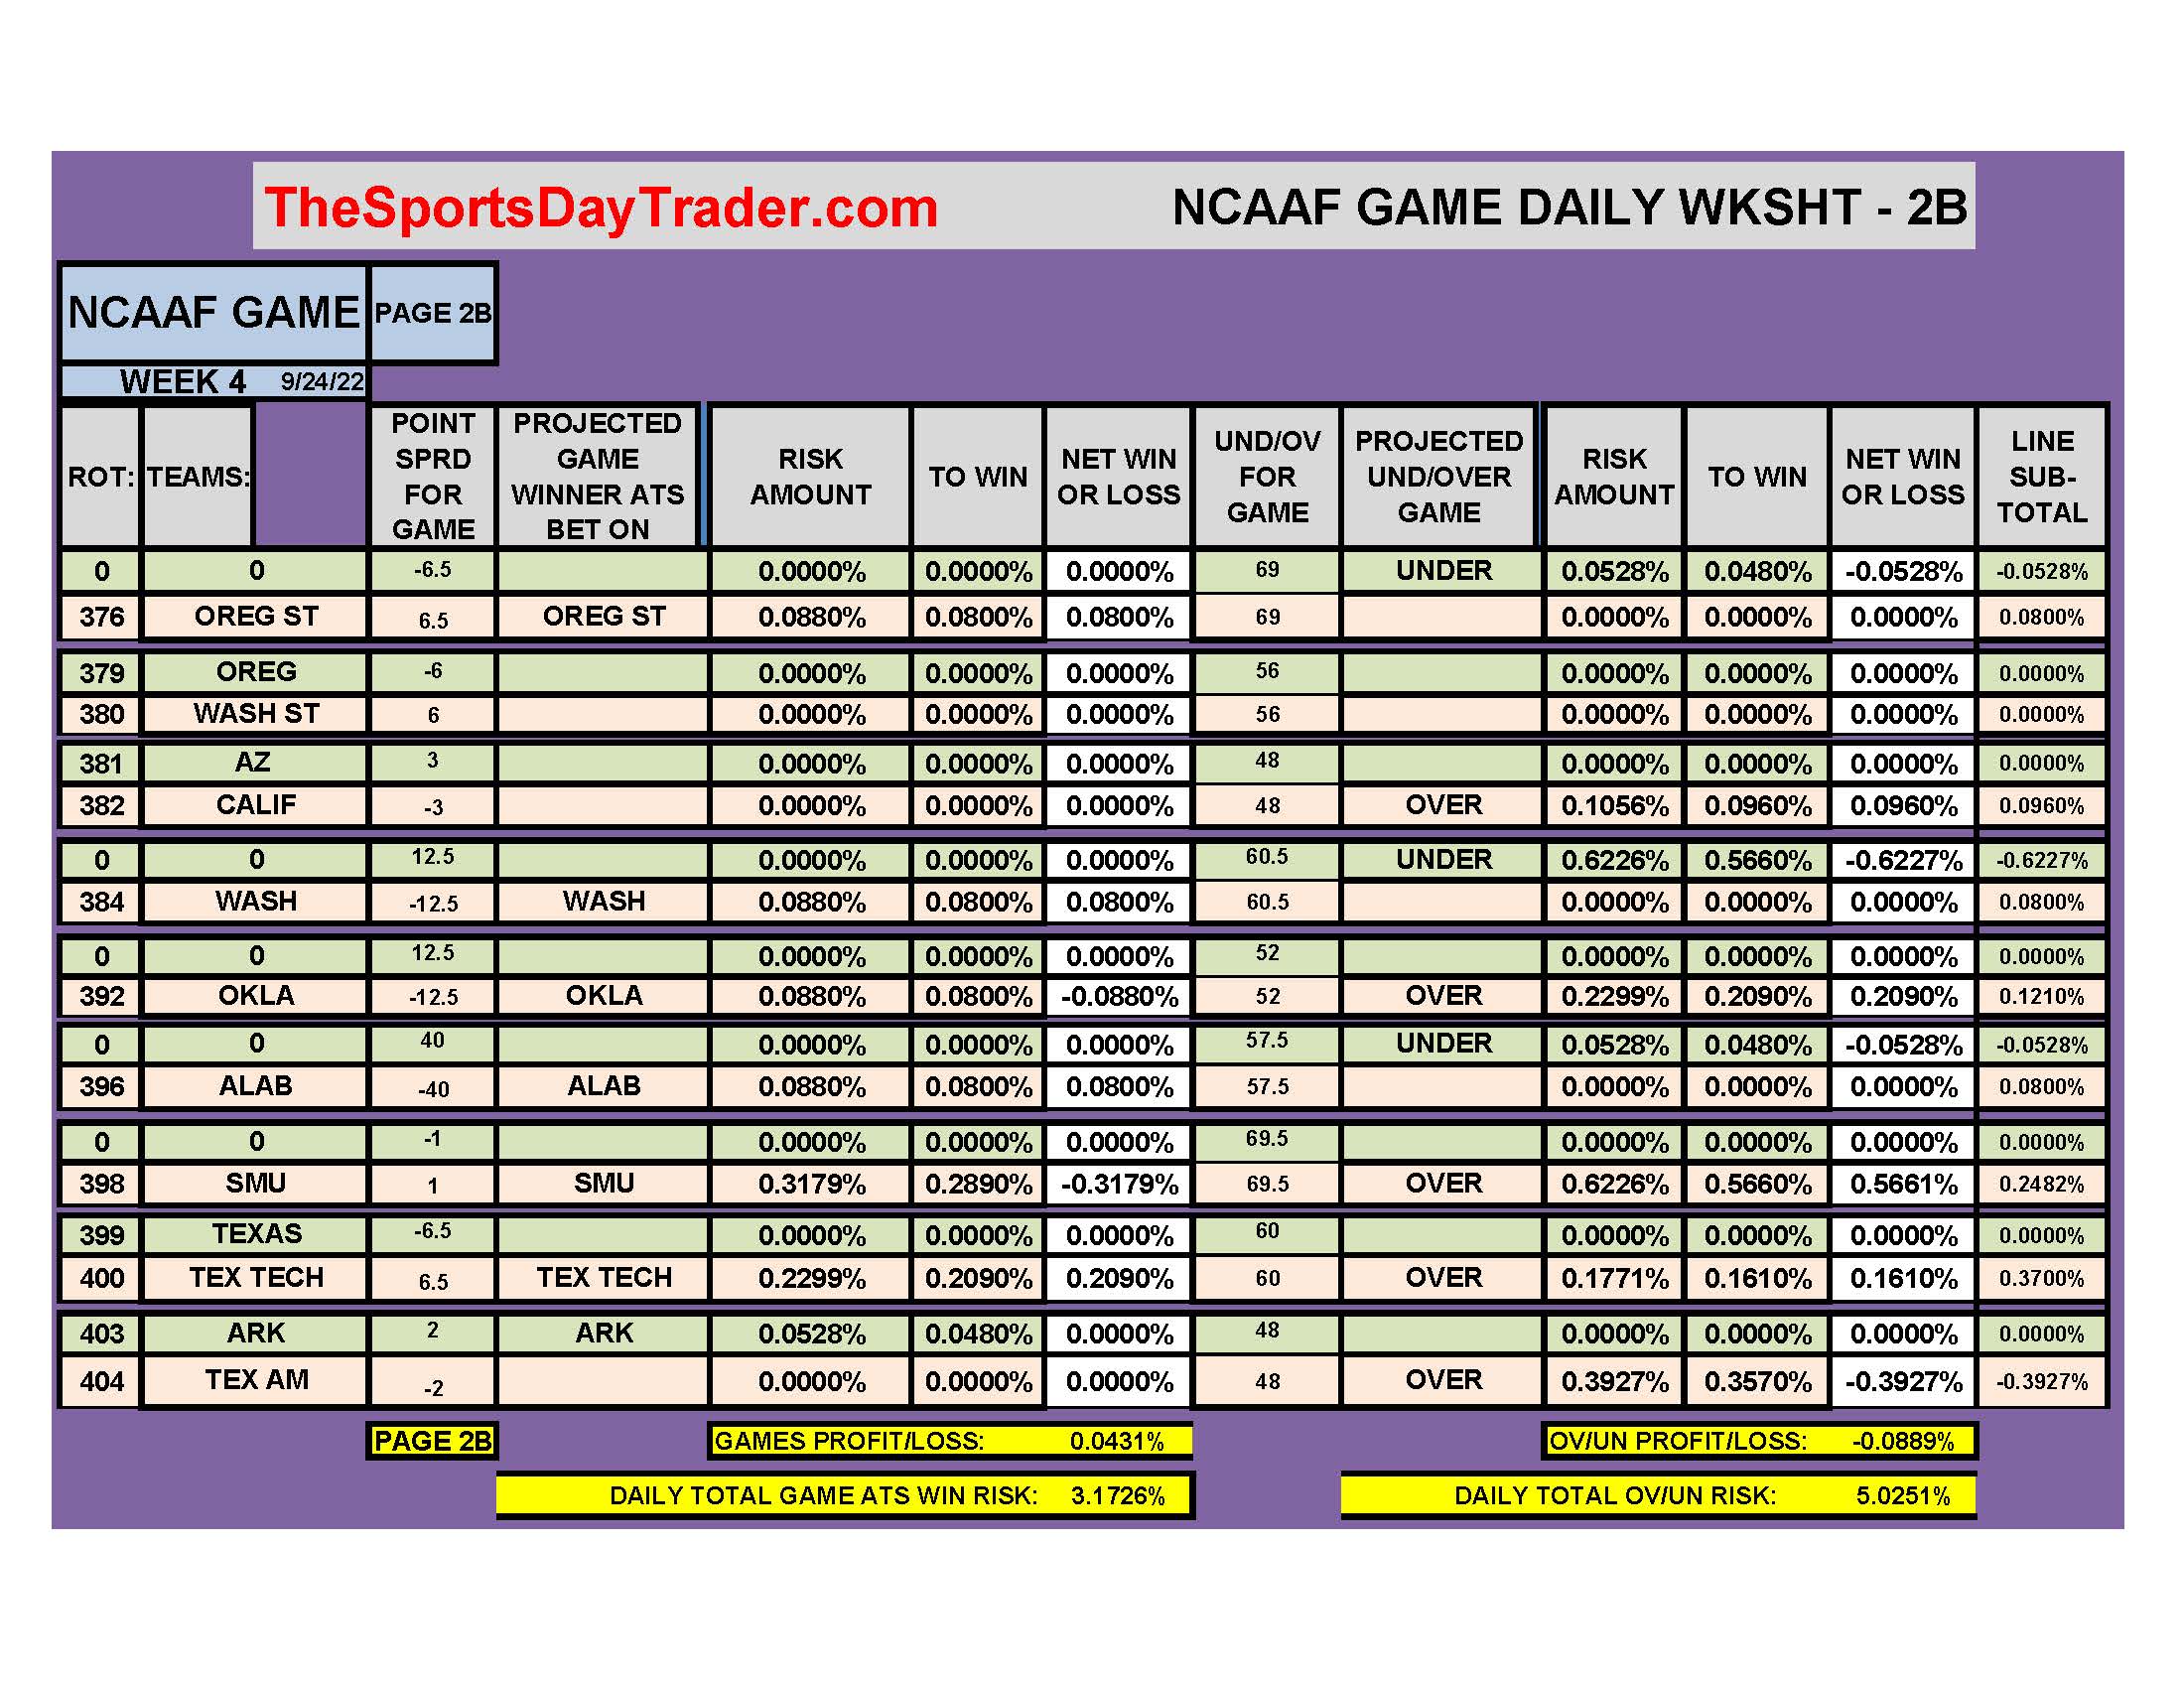 NCAAF 9/24/22 GAME DAILY RESULTS page 2B